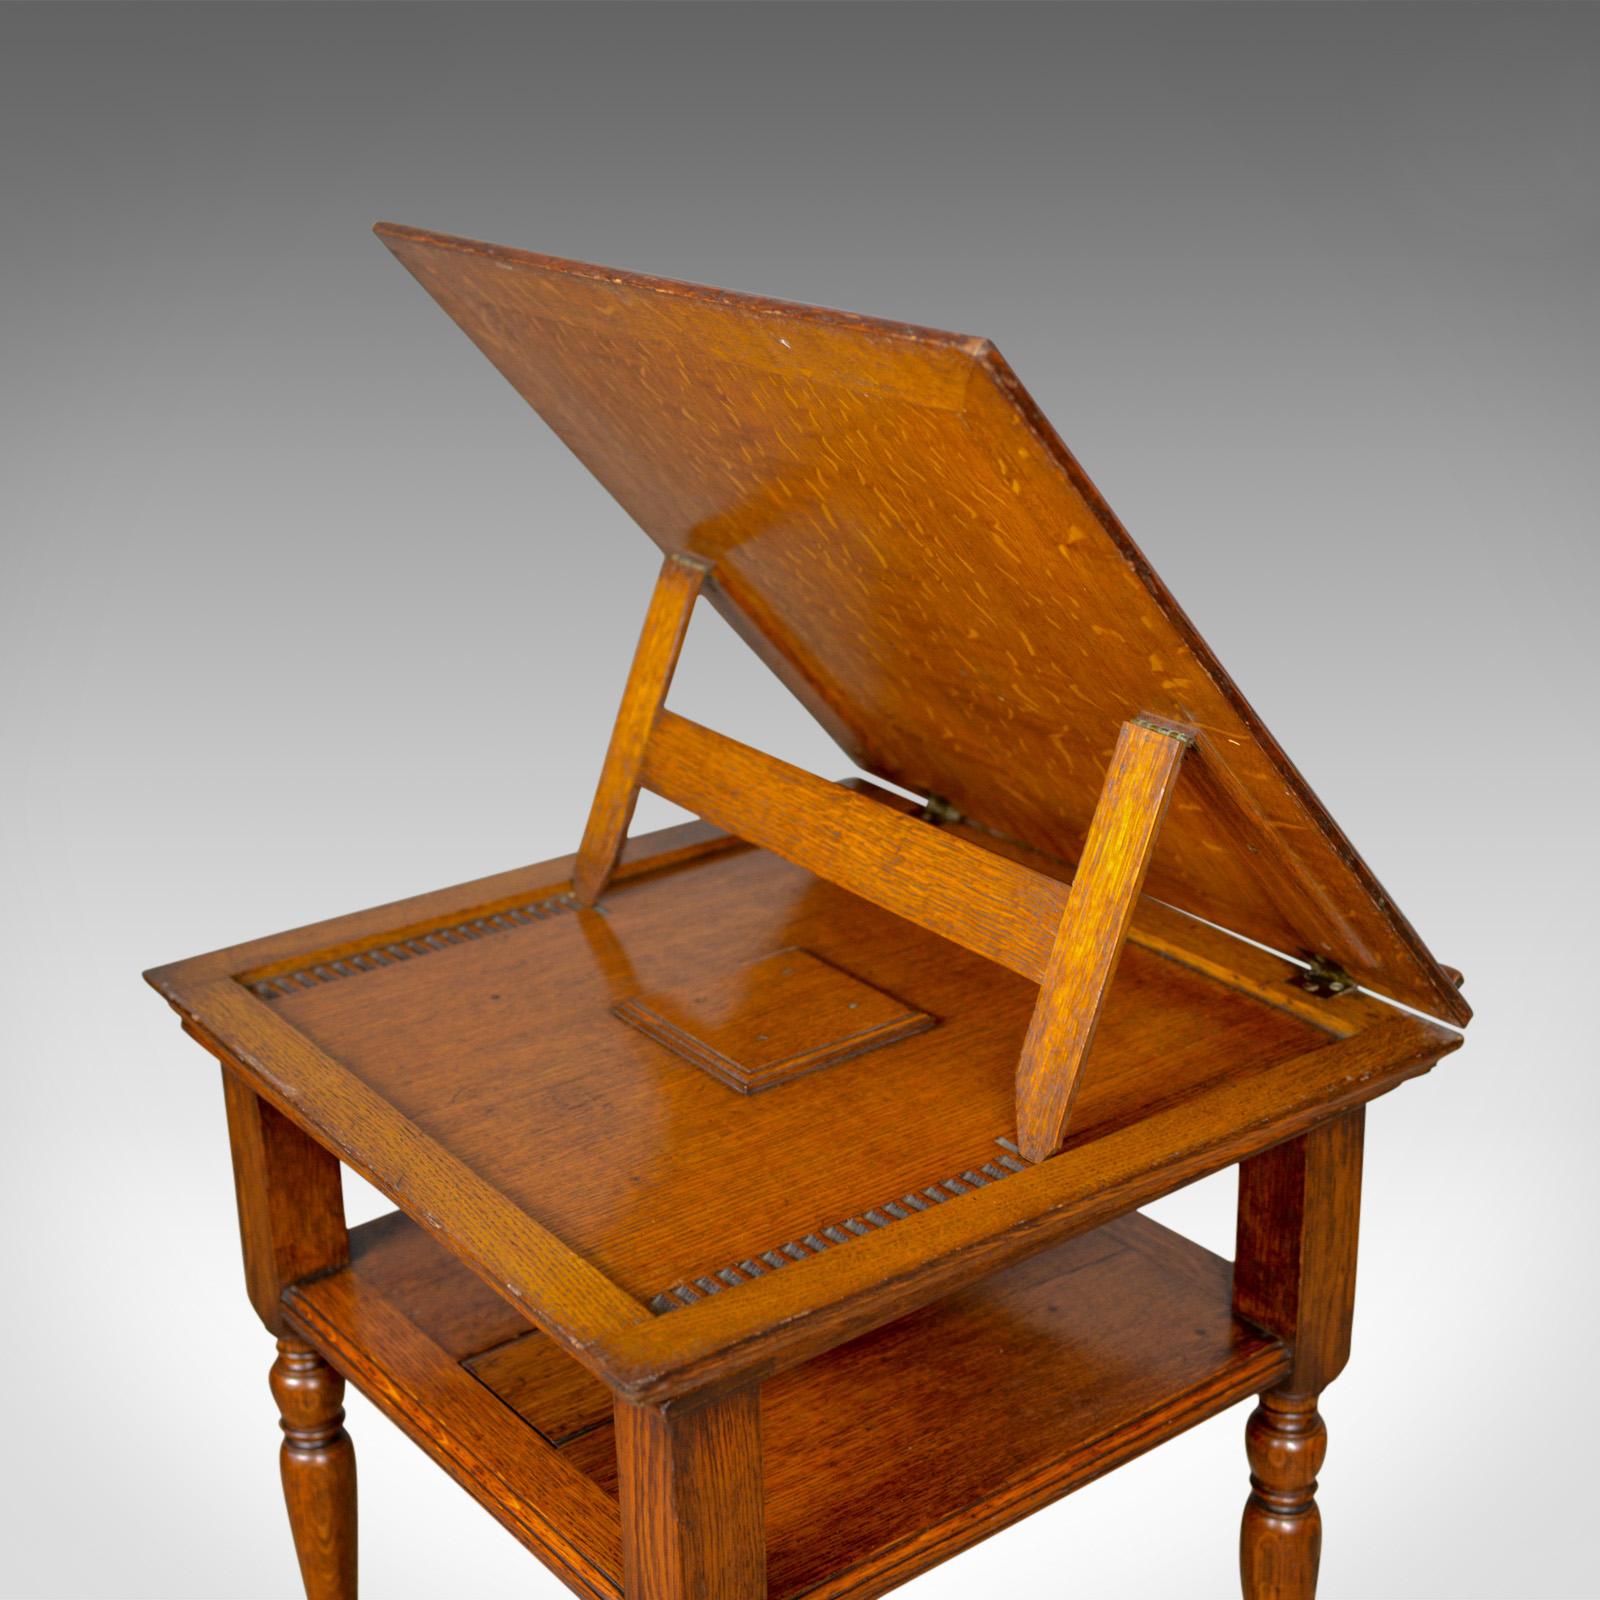 19th Century Antique, Metamorphic, Side Table, Lectern, Oak, Library, Reading, circa 1860